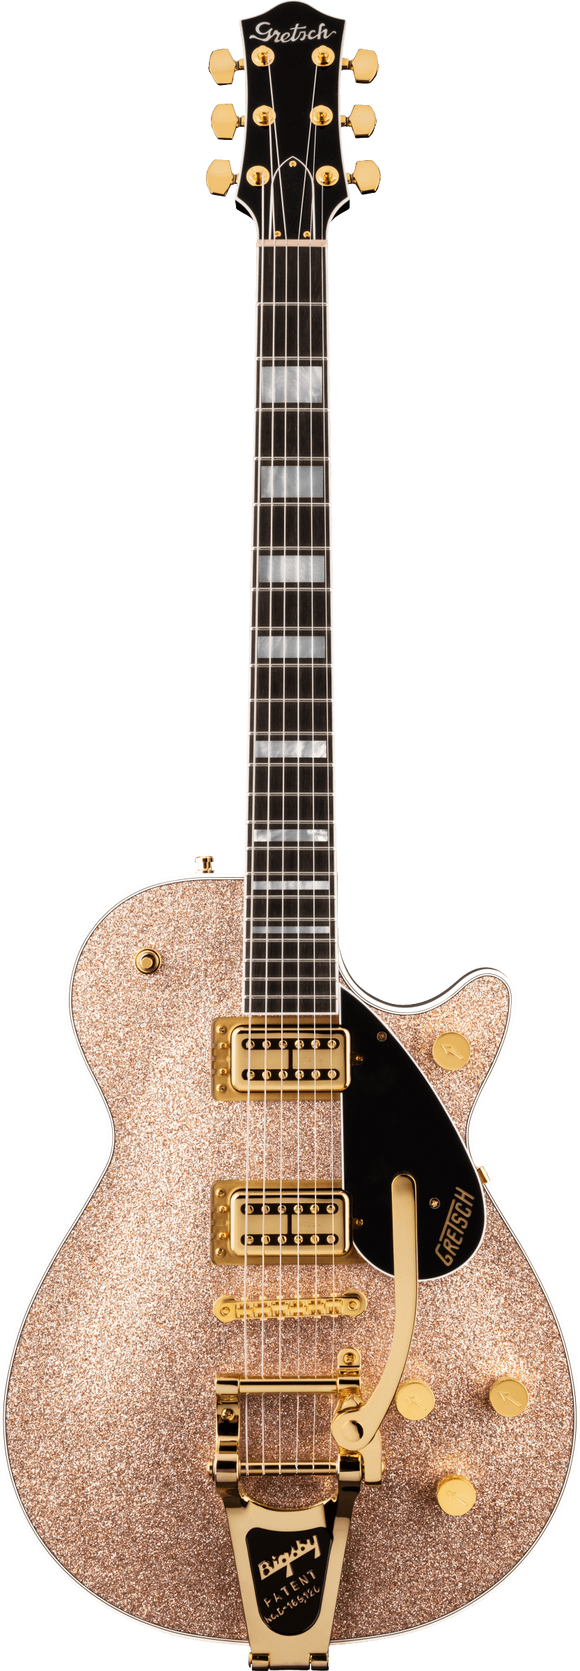 Gretsch G6229TG Limited Edition Players Edition Sparkle Jet BT with Bigsby, Champagne Sparkle